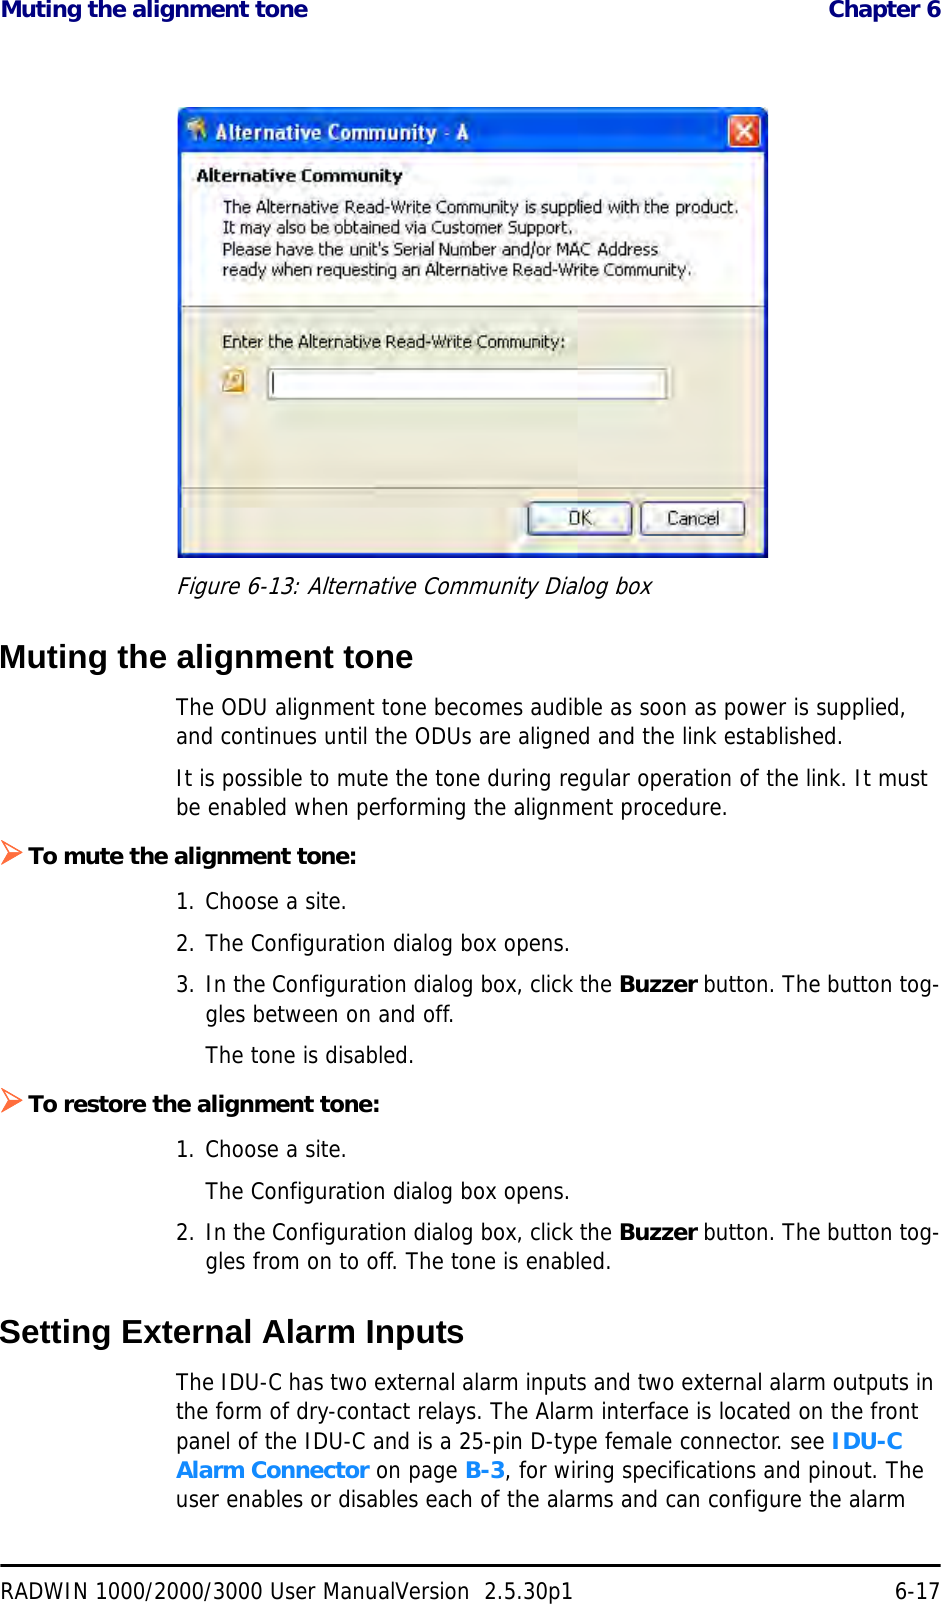 Muting the alignment tone  Chapter 6RADWIN 1000/2000/3000 User ManualVersion  2.5.30p1 6-17Figure 6-13: Alternative Community Dialog boxMuting the alignment toneThe ODU alignment tone becomes audible as soon as power is supplied, and continues until the ODUs are aligned and the link established.It is possible to mute the tone during regular operation of the link. It must be enabled when performing the alignment procedure.¾To mute the alignment tone:1. Choose a site.2. The Configuration dialog box opens.3. In the Configuration dialog box, click the Buzzer button. The button tog-gles between on and off.The tone is disabled.¾To restore the alignment tone:1. Choose a site.The Configuration dialog box opens.2. In the Configuration dialog box, click the Buzzer button. The button tog-gles from on to off. The tone is enabled.Setting External Alarm InputsThe IDU-C has two external alarm inputs and two external alarm outputs in the form of dry-contact relays. The Alarm interface is located on the front panel of the IDU-C and is a 25-pin D-type female connector. see IDU-C Alarm Connector on page B-3, for wiring specifications and pinout. The user enables or disables each of the alarms and can configure the alarm 